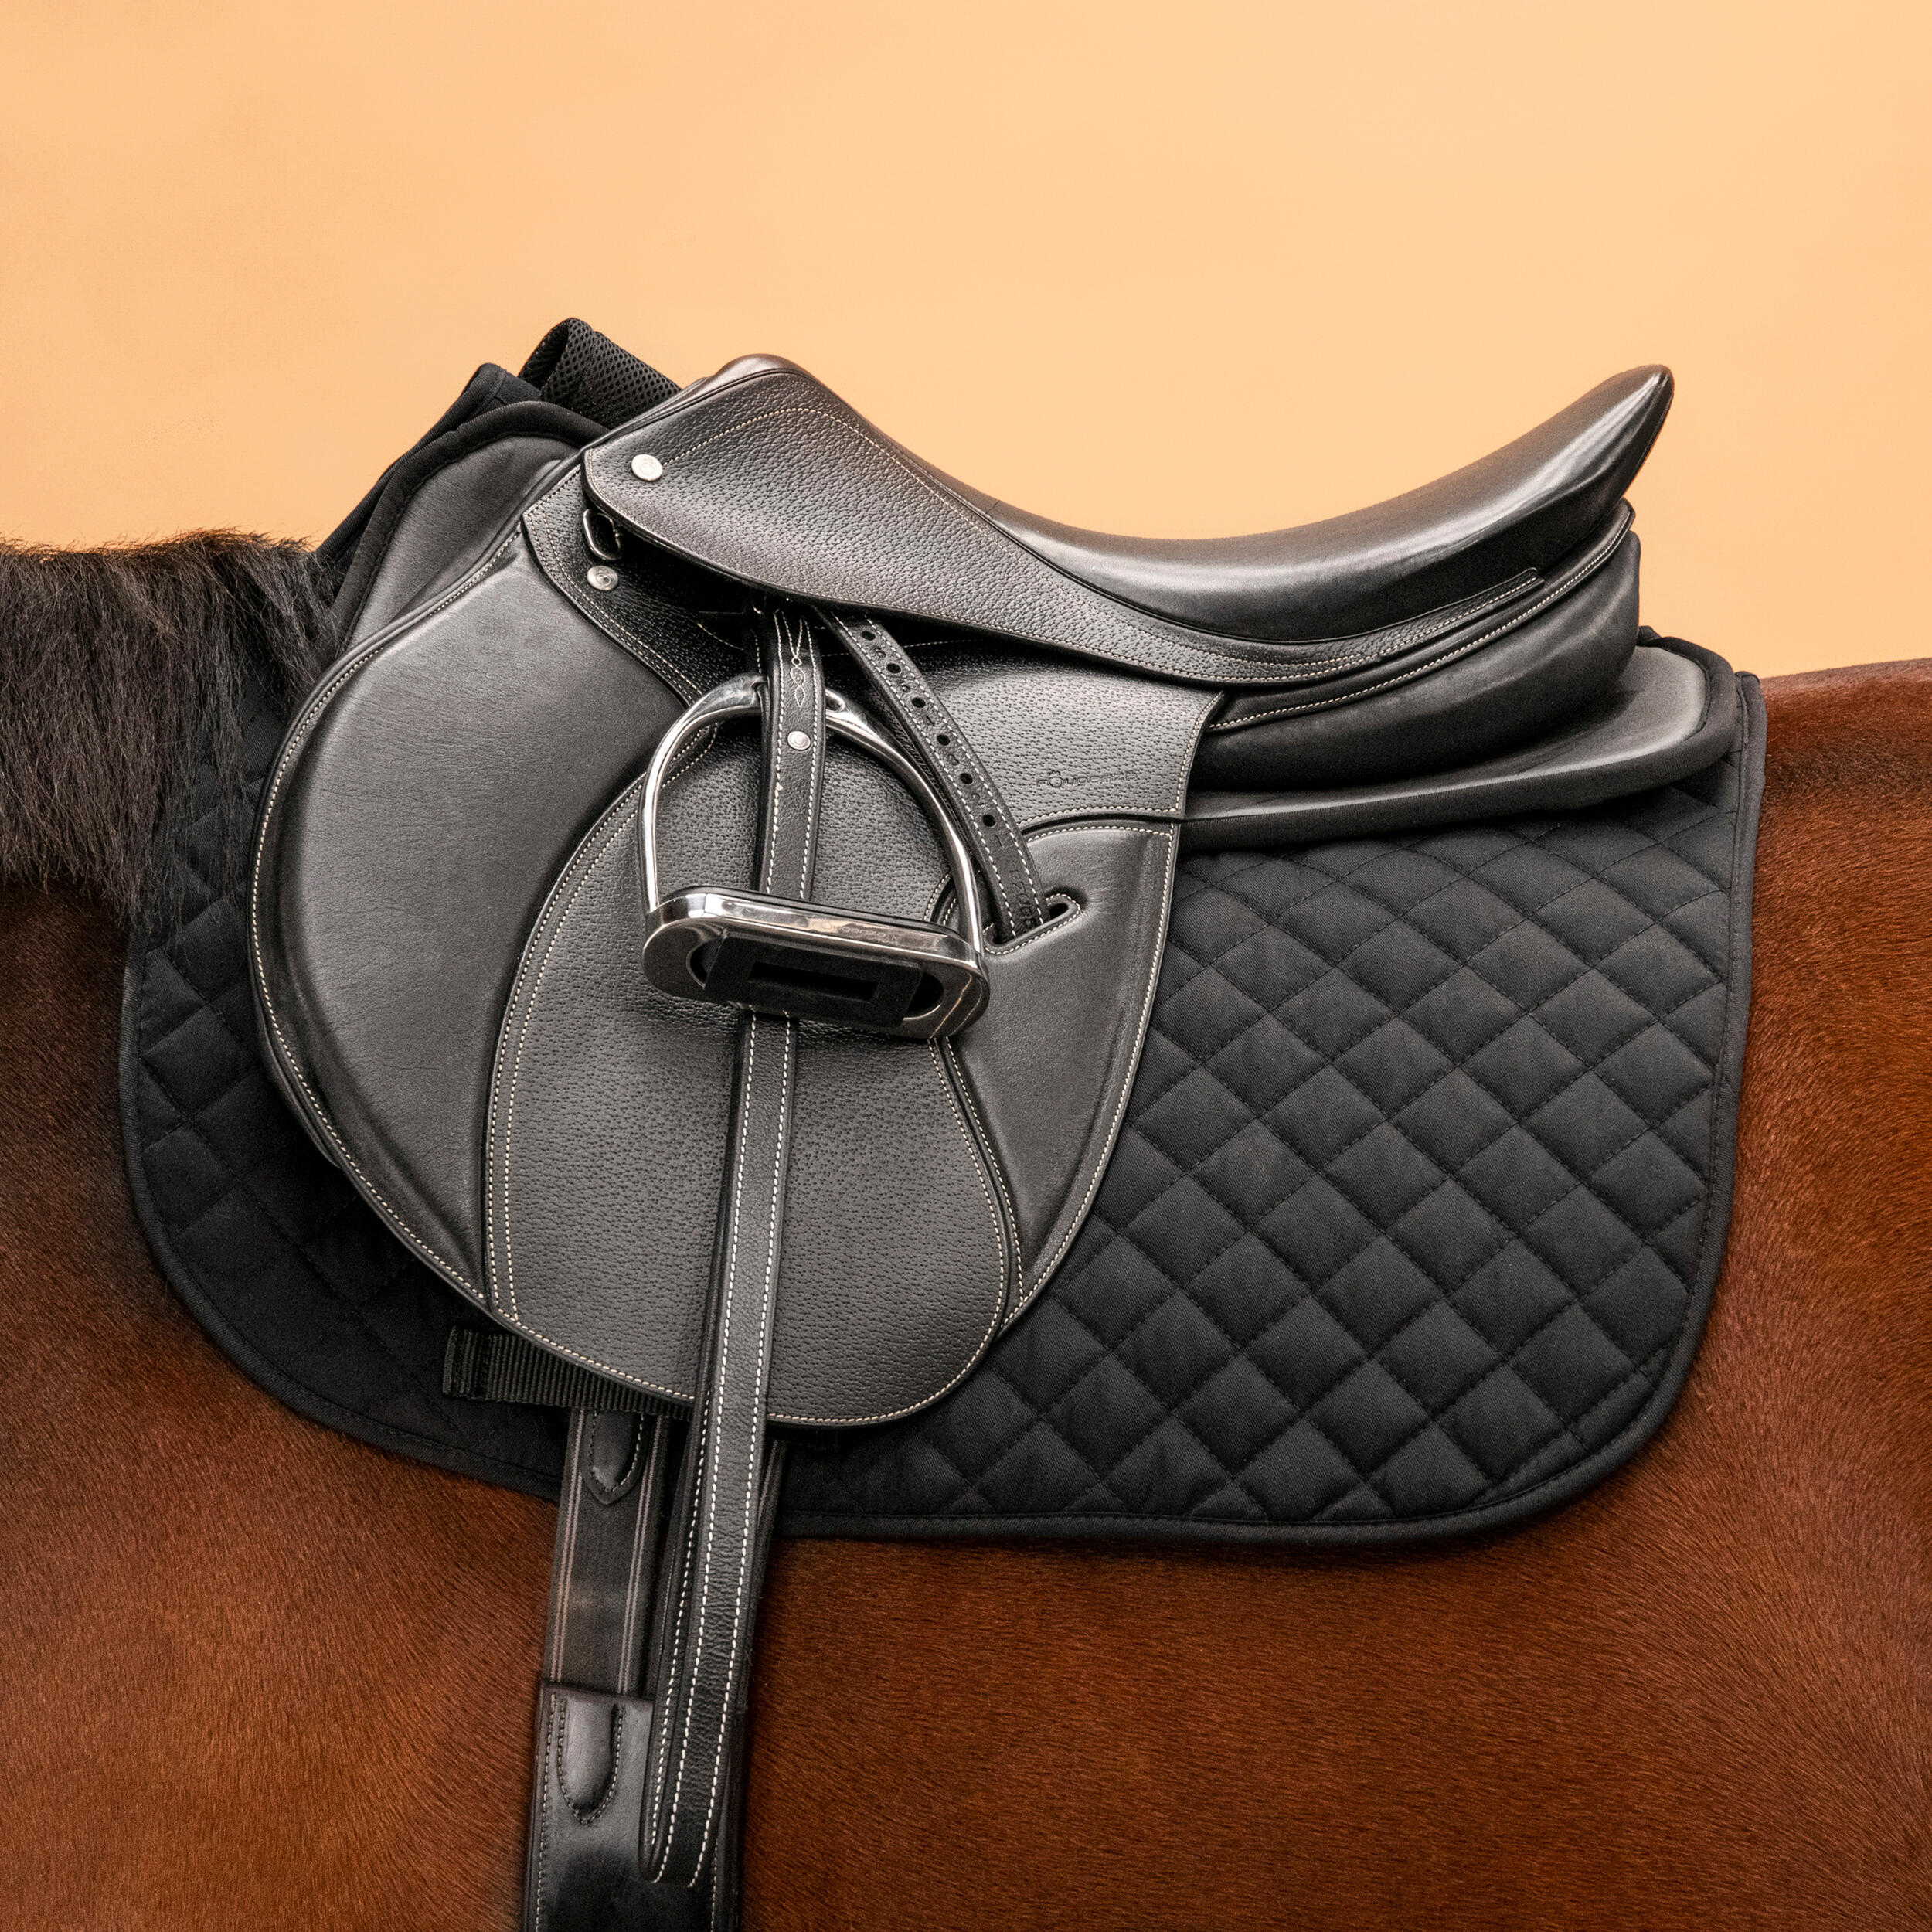 Horse Riding Foam Saddle Pad For Horse and Pony 100 - Black 5/7